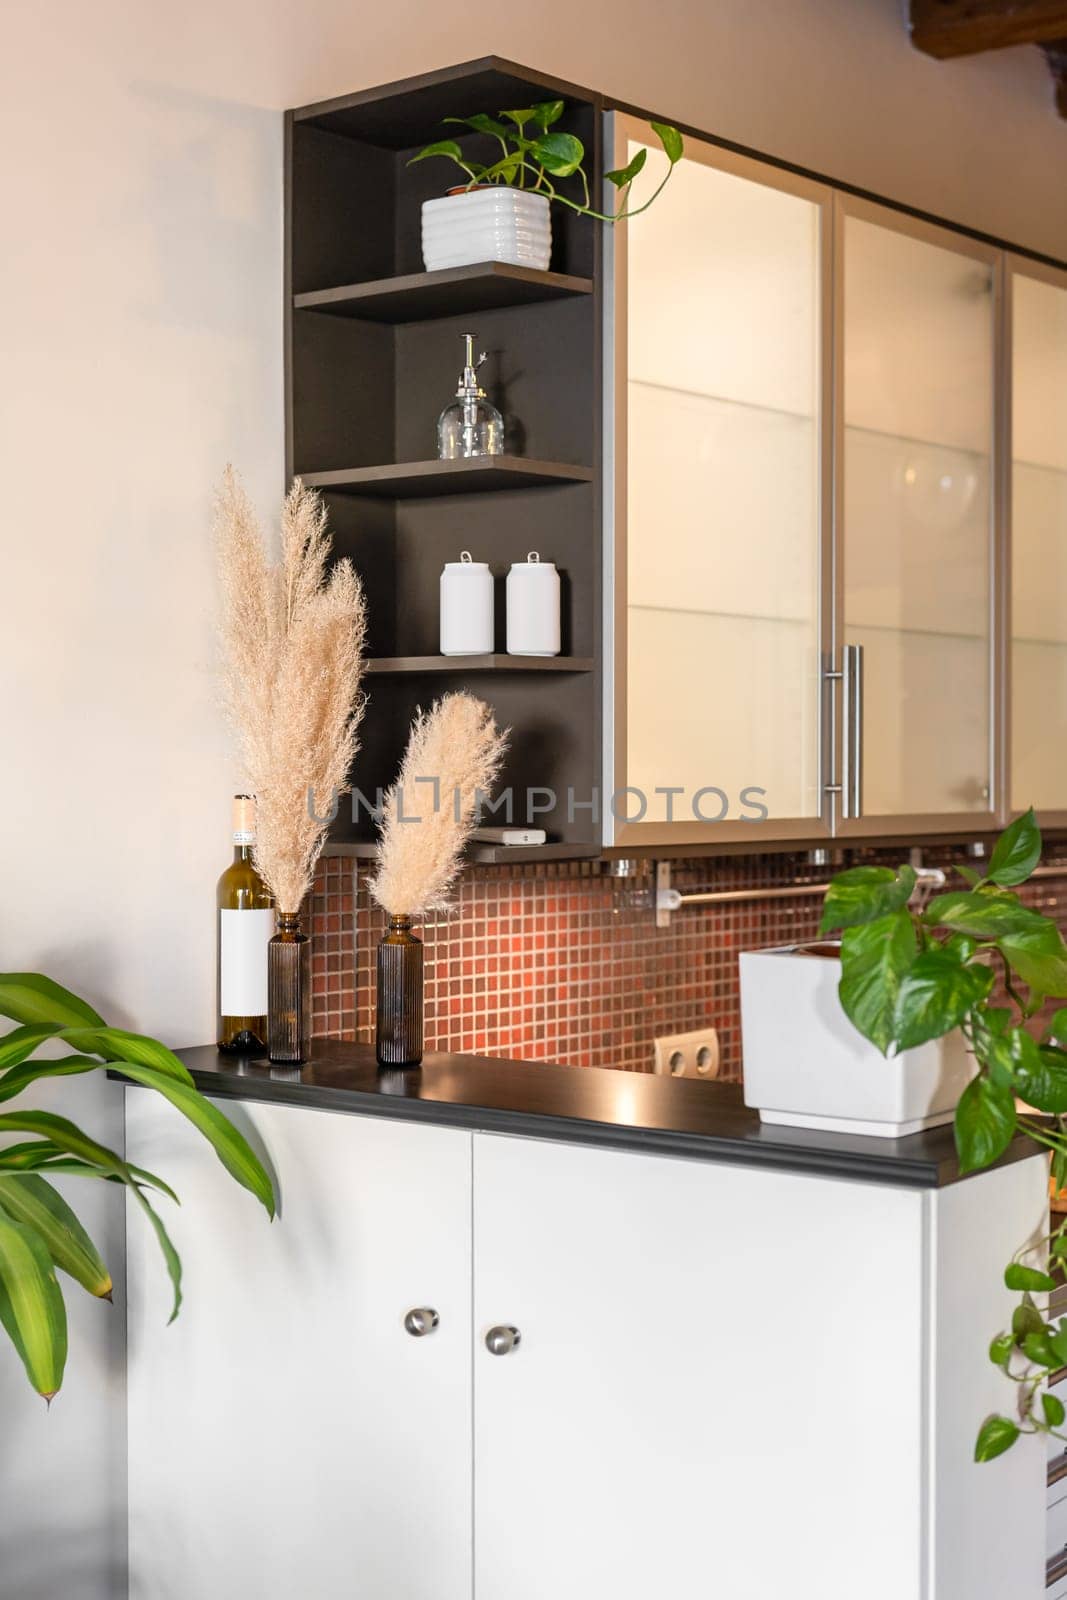 View of the mini bar with a built-in cabinet made of white painted wood in a small but cozy kitchen with plants and decor elements. Modern design in tiny spaces concept.